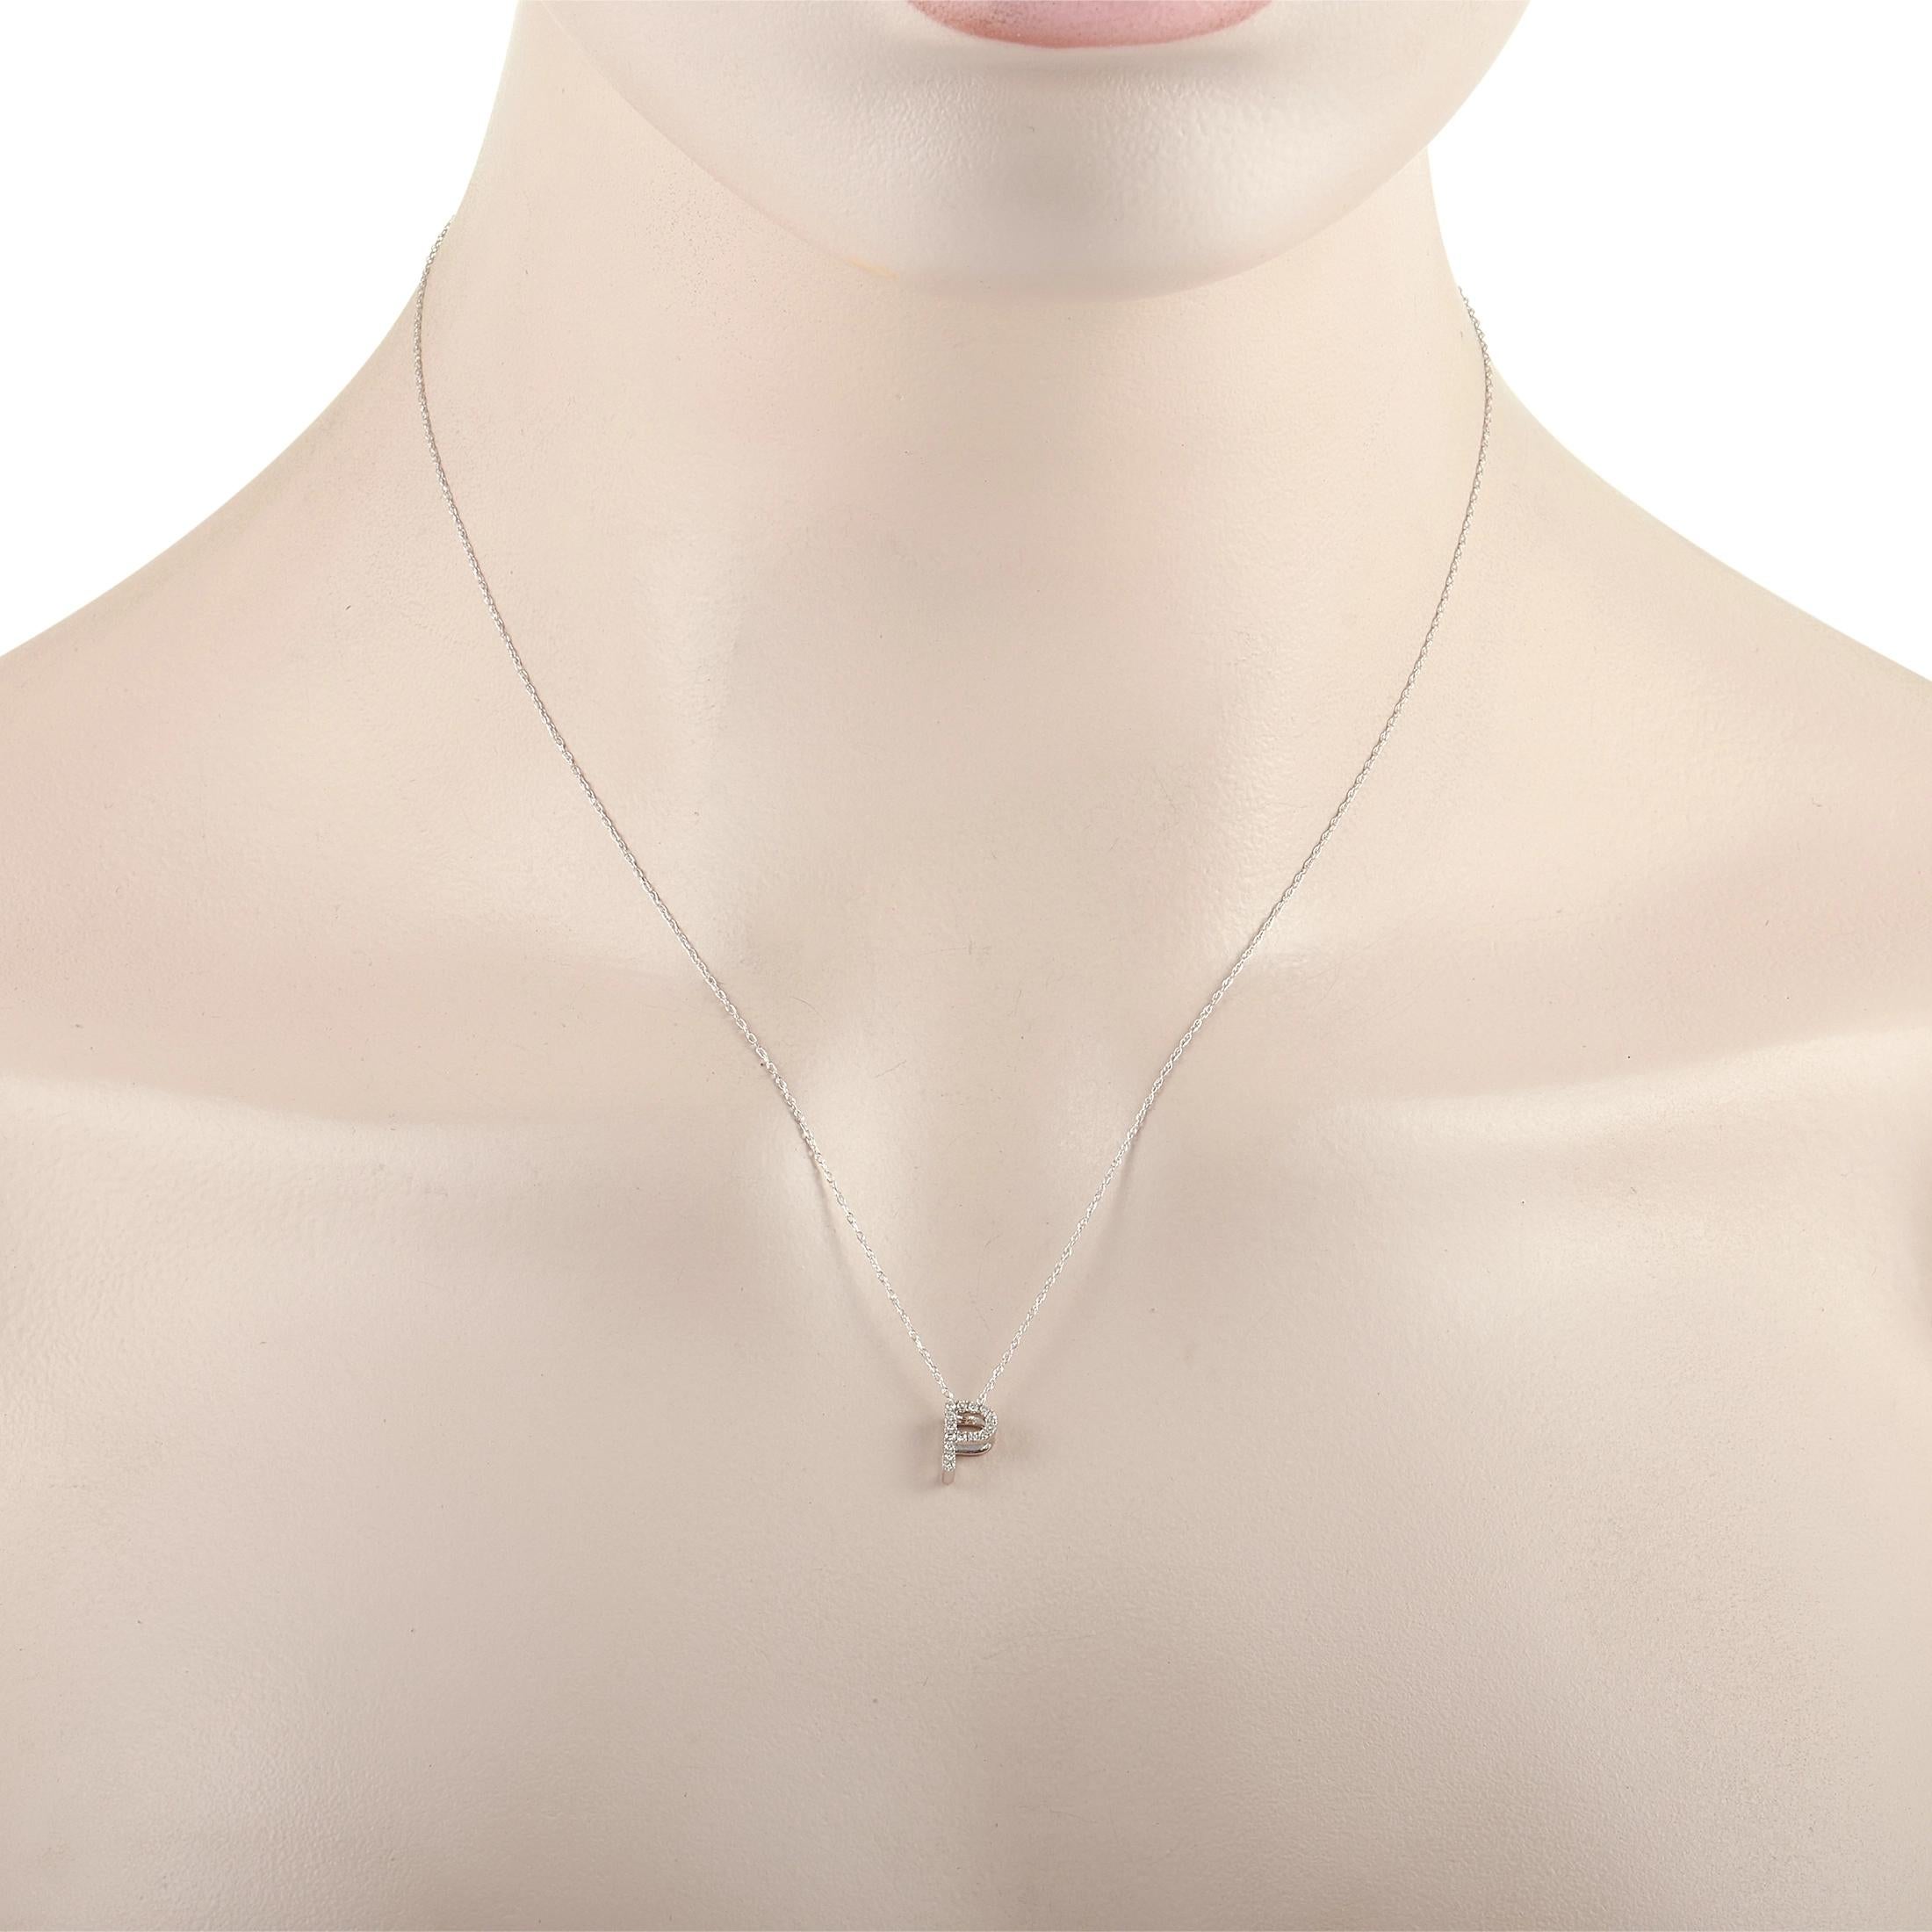 This pretty LB Exclusive 14K White Gold 0.10 ct Diamond Initial ‘P’ Necklace is made with a delicate 14K white gold chain and features a small white gold pendant shaped like the letter ‘P’ and set with 0.10 carats of round diamonds throughout. The